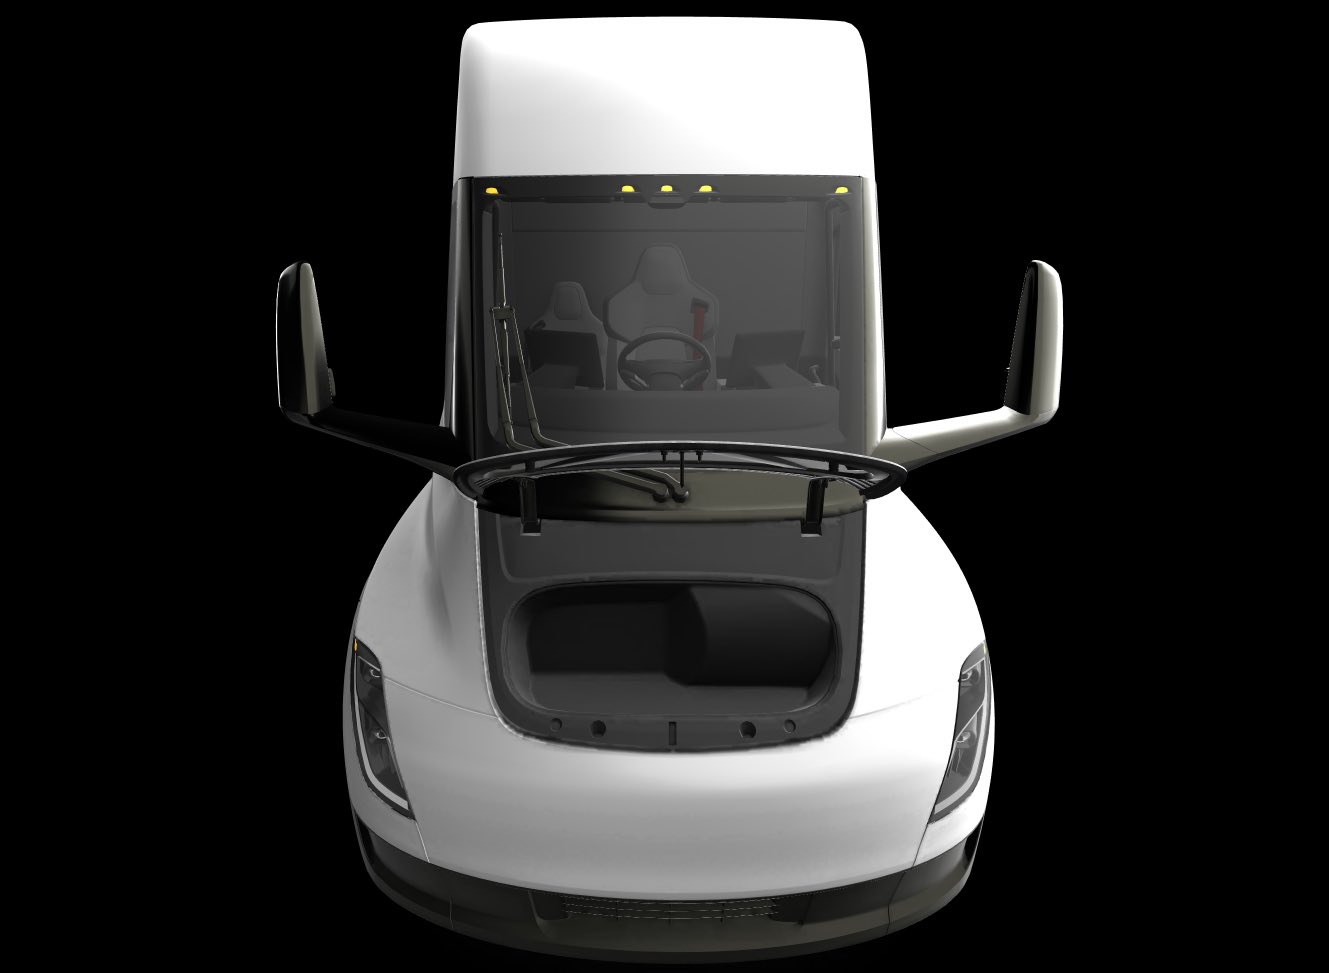 Tesla has added 3D models of the Tesla Semi to their app